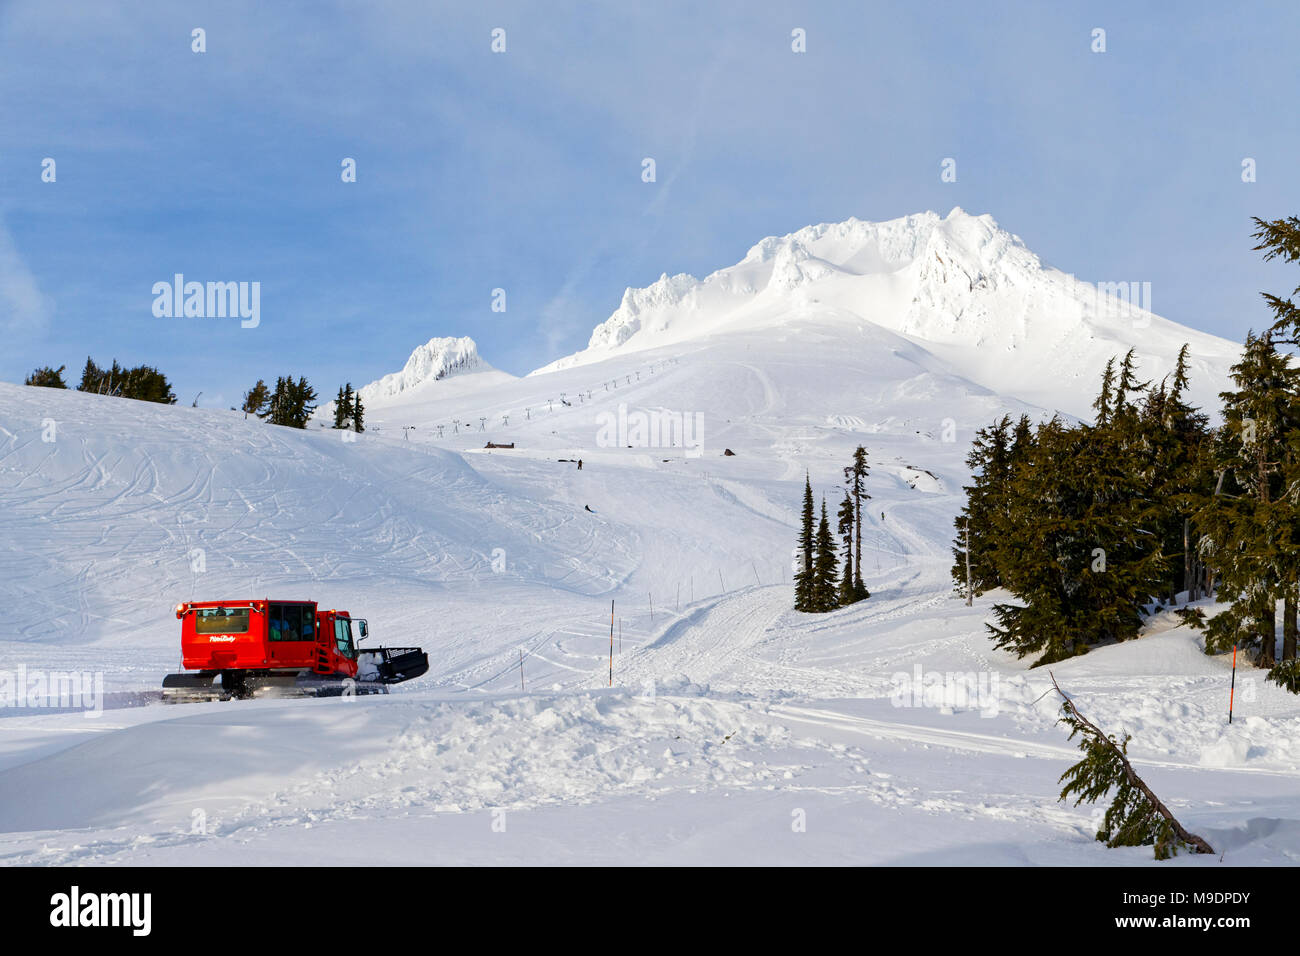 42,778.00959 trees Mt Hood (11,240’), red snowcat going up hill grooming the Timberline Mountain Ski Area Stock Photo